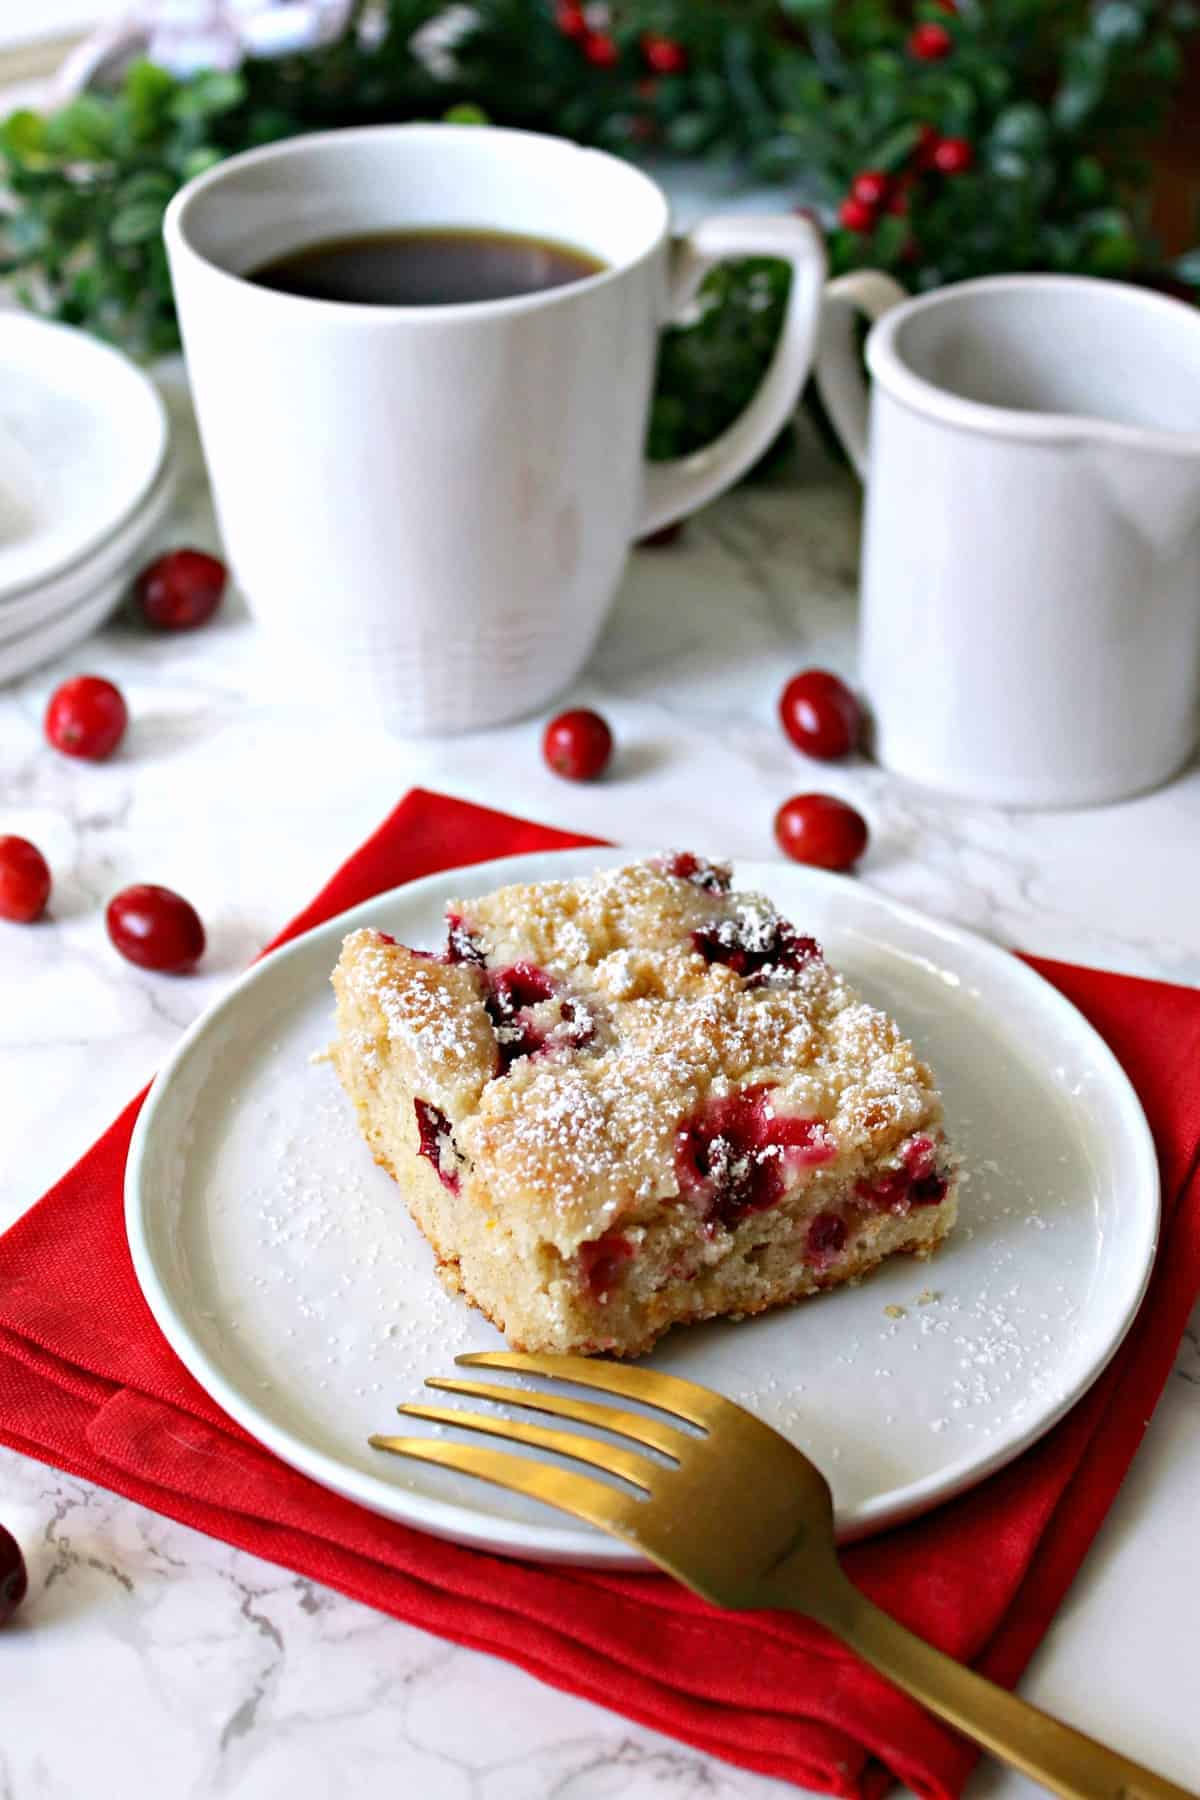 Cranberry Streusel Cake! Tart, fresh cranberries are tamed by a sweet, buttery streusel on this versatile, holiday-ready cake that's equally delicious for brunch or dessert!